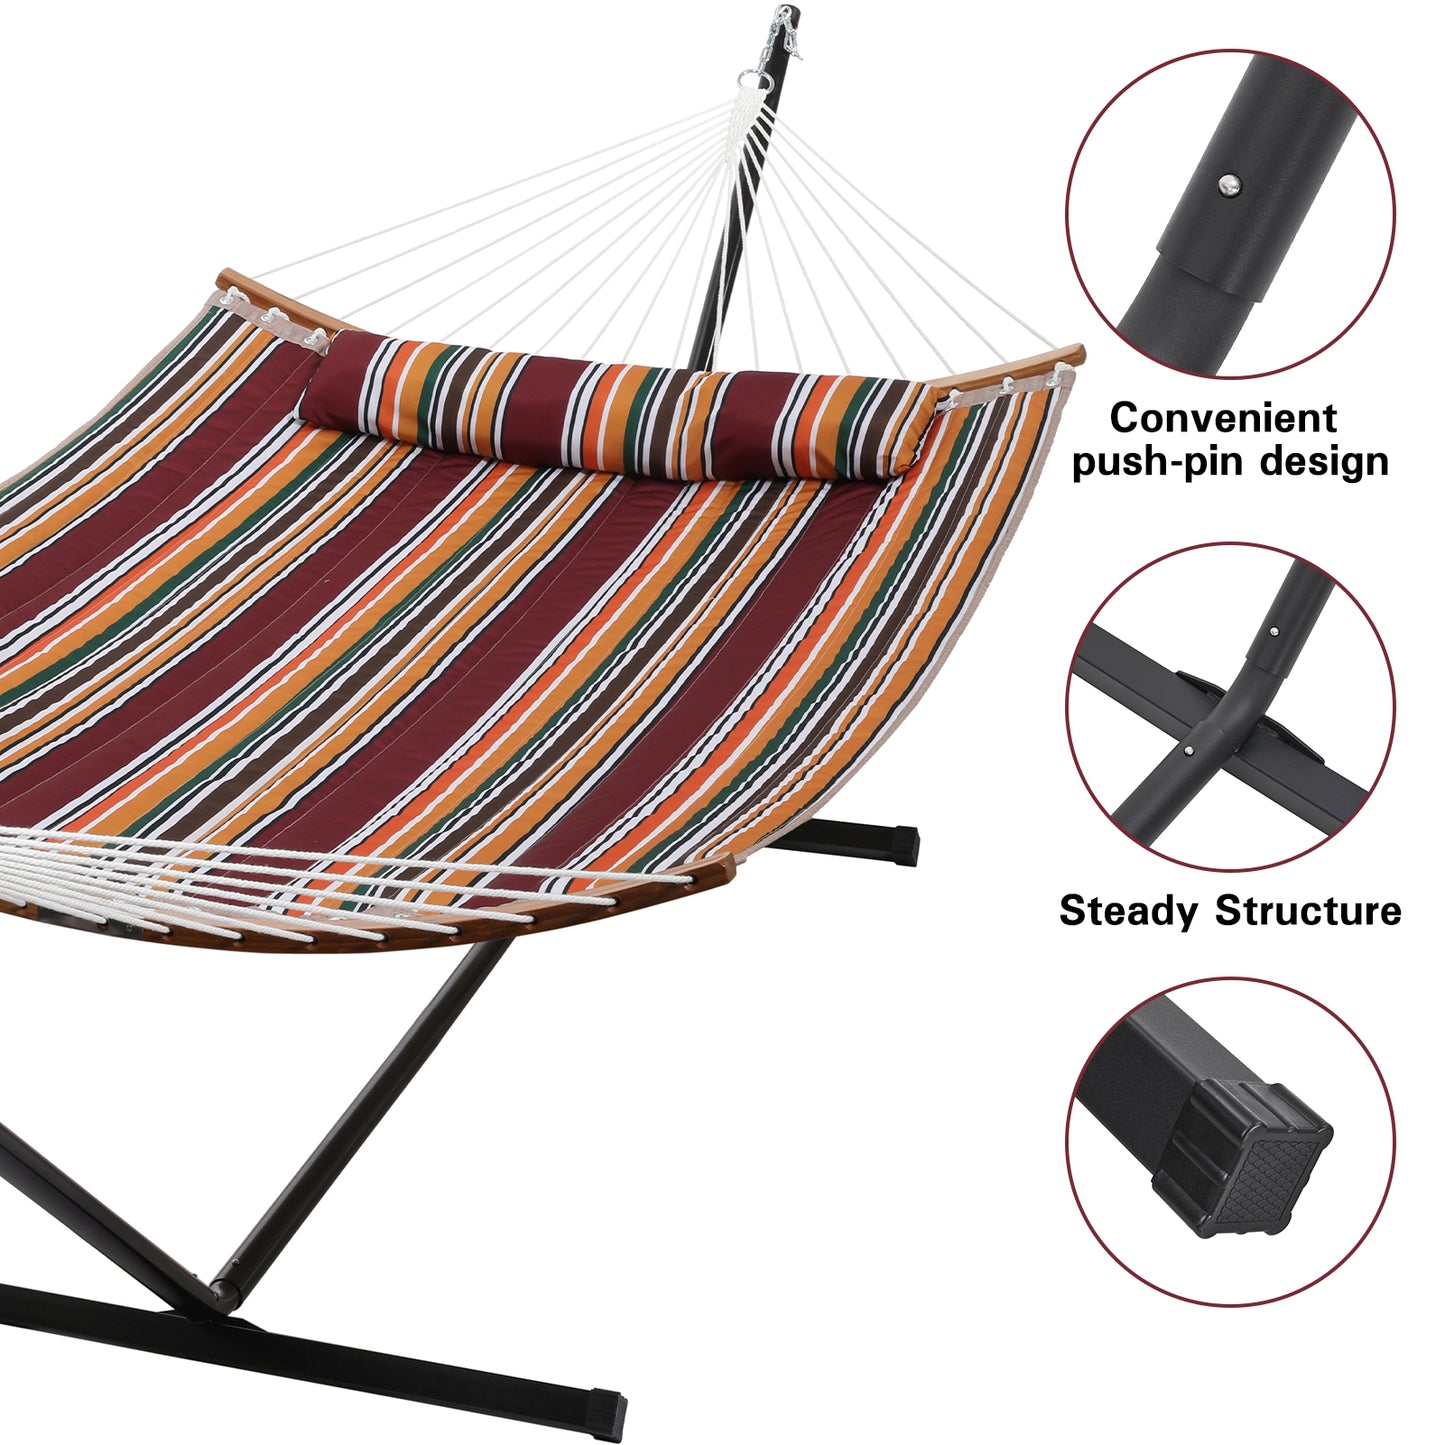 SUPERJARE Hammock with Stand - Maple-Leaf Red, 3702W